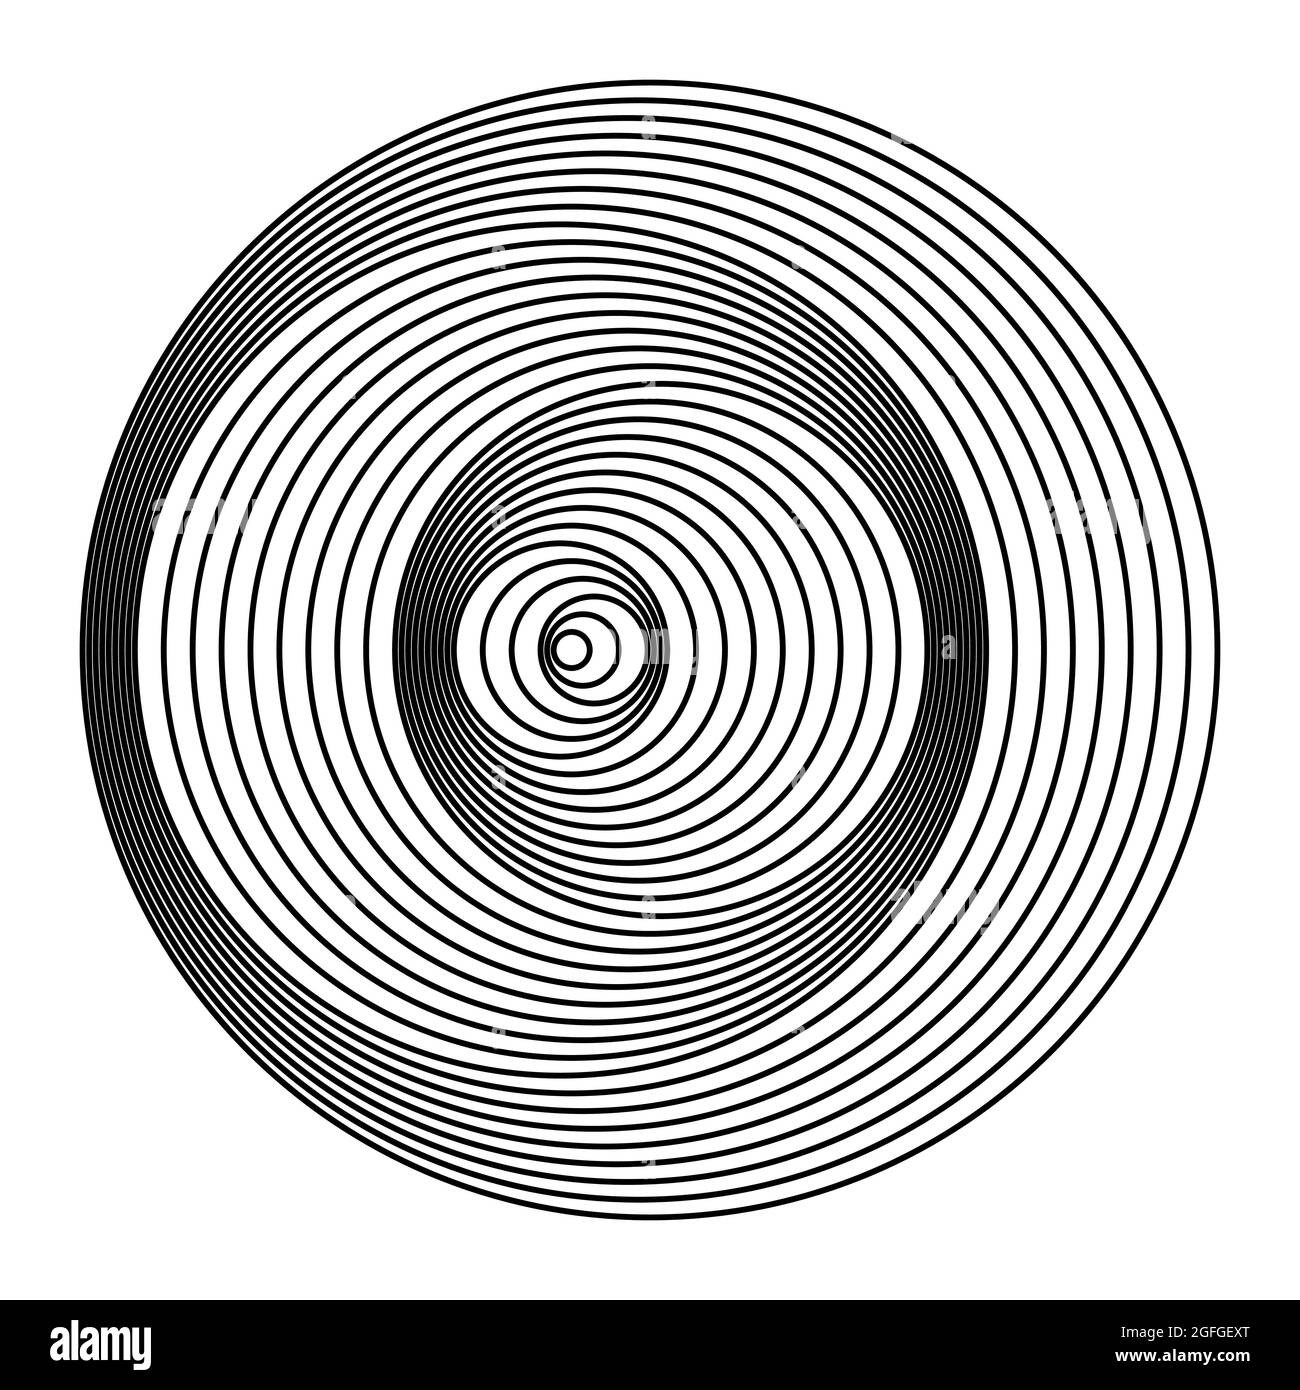 Abstract black concentric circles. Vector illustration. Design element for technology round logo, striped border frame, tattoo, prints Stock Vector